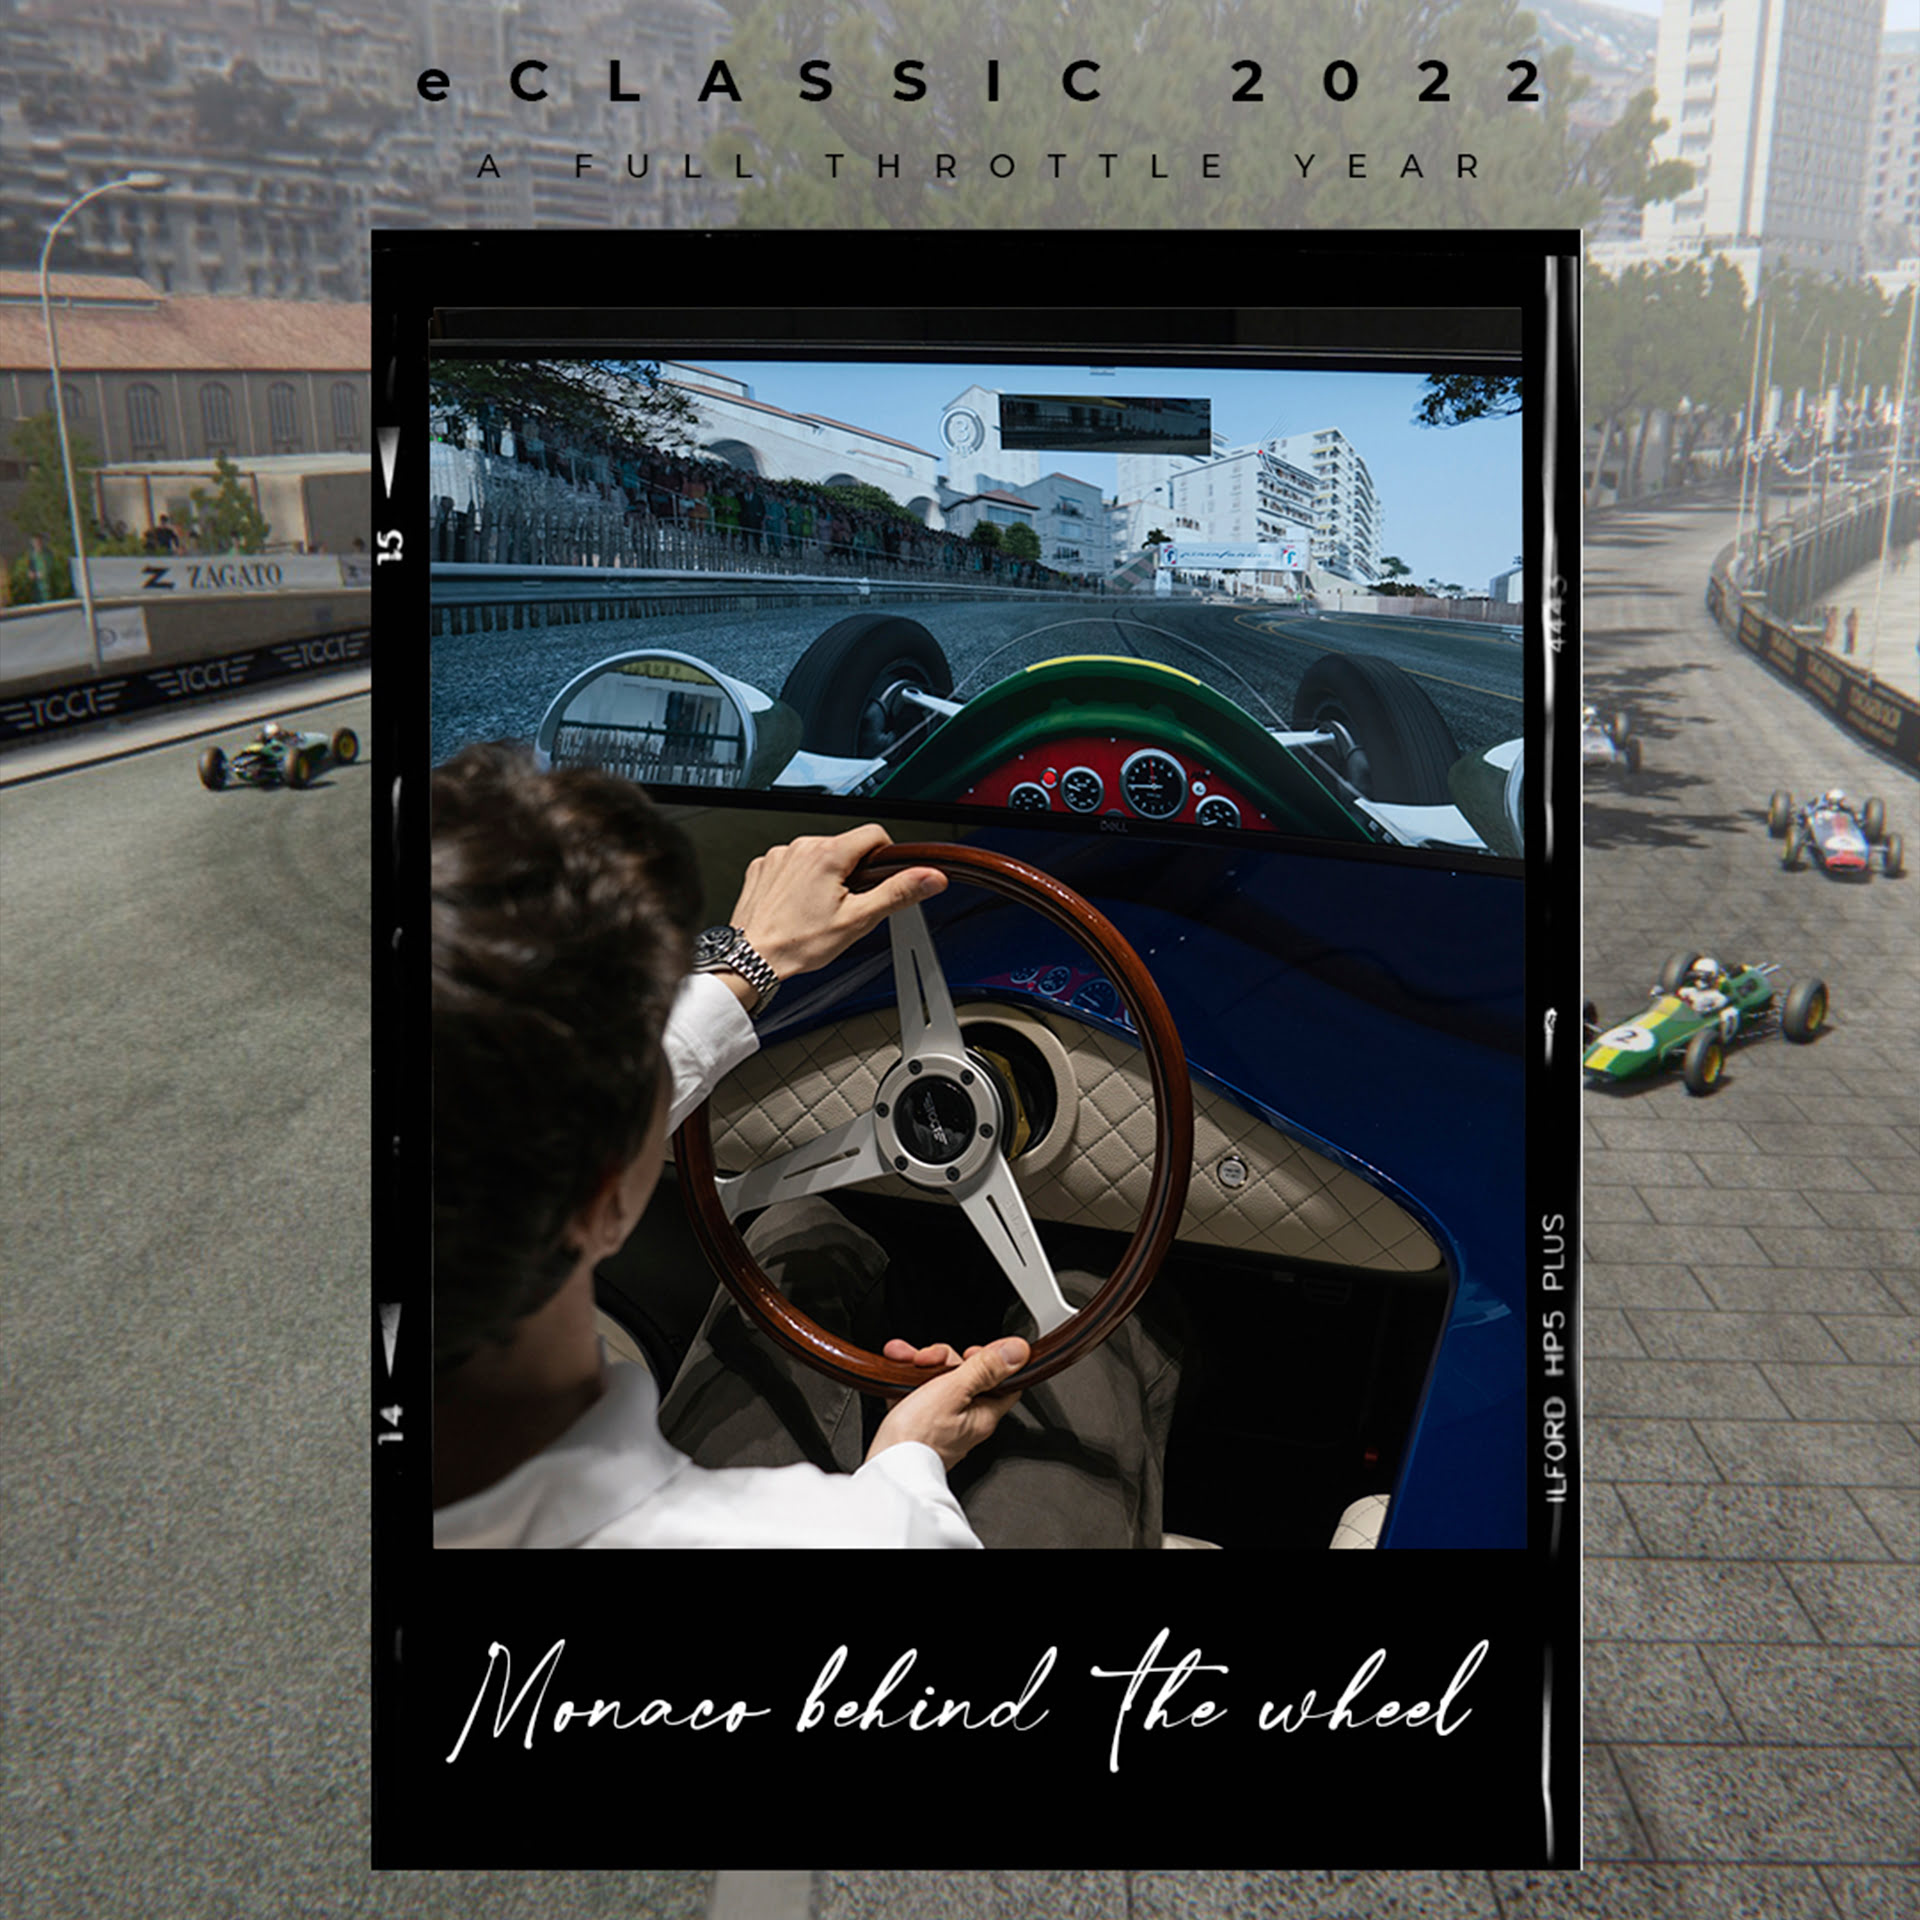 eClassic 2022: a full throttle year Monaco: behind the wheel with Clark image